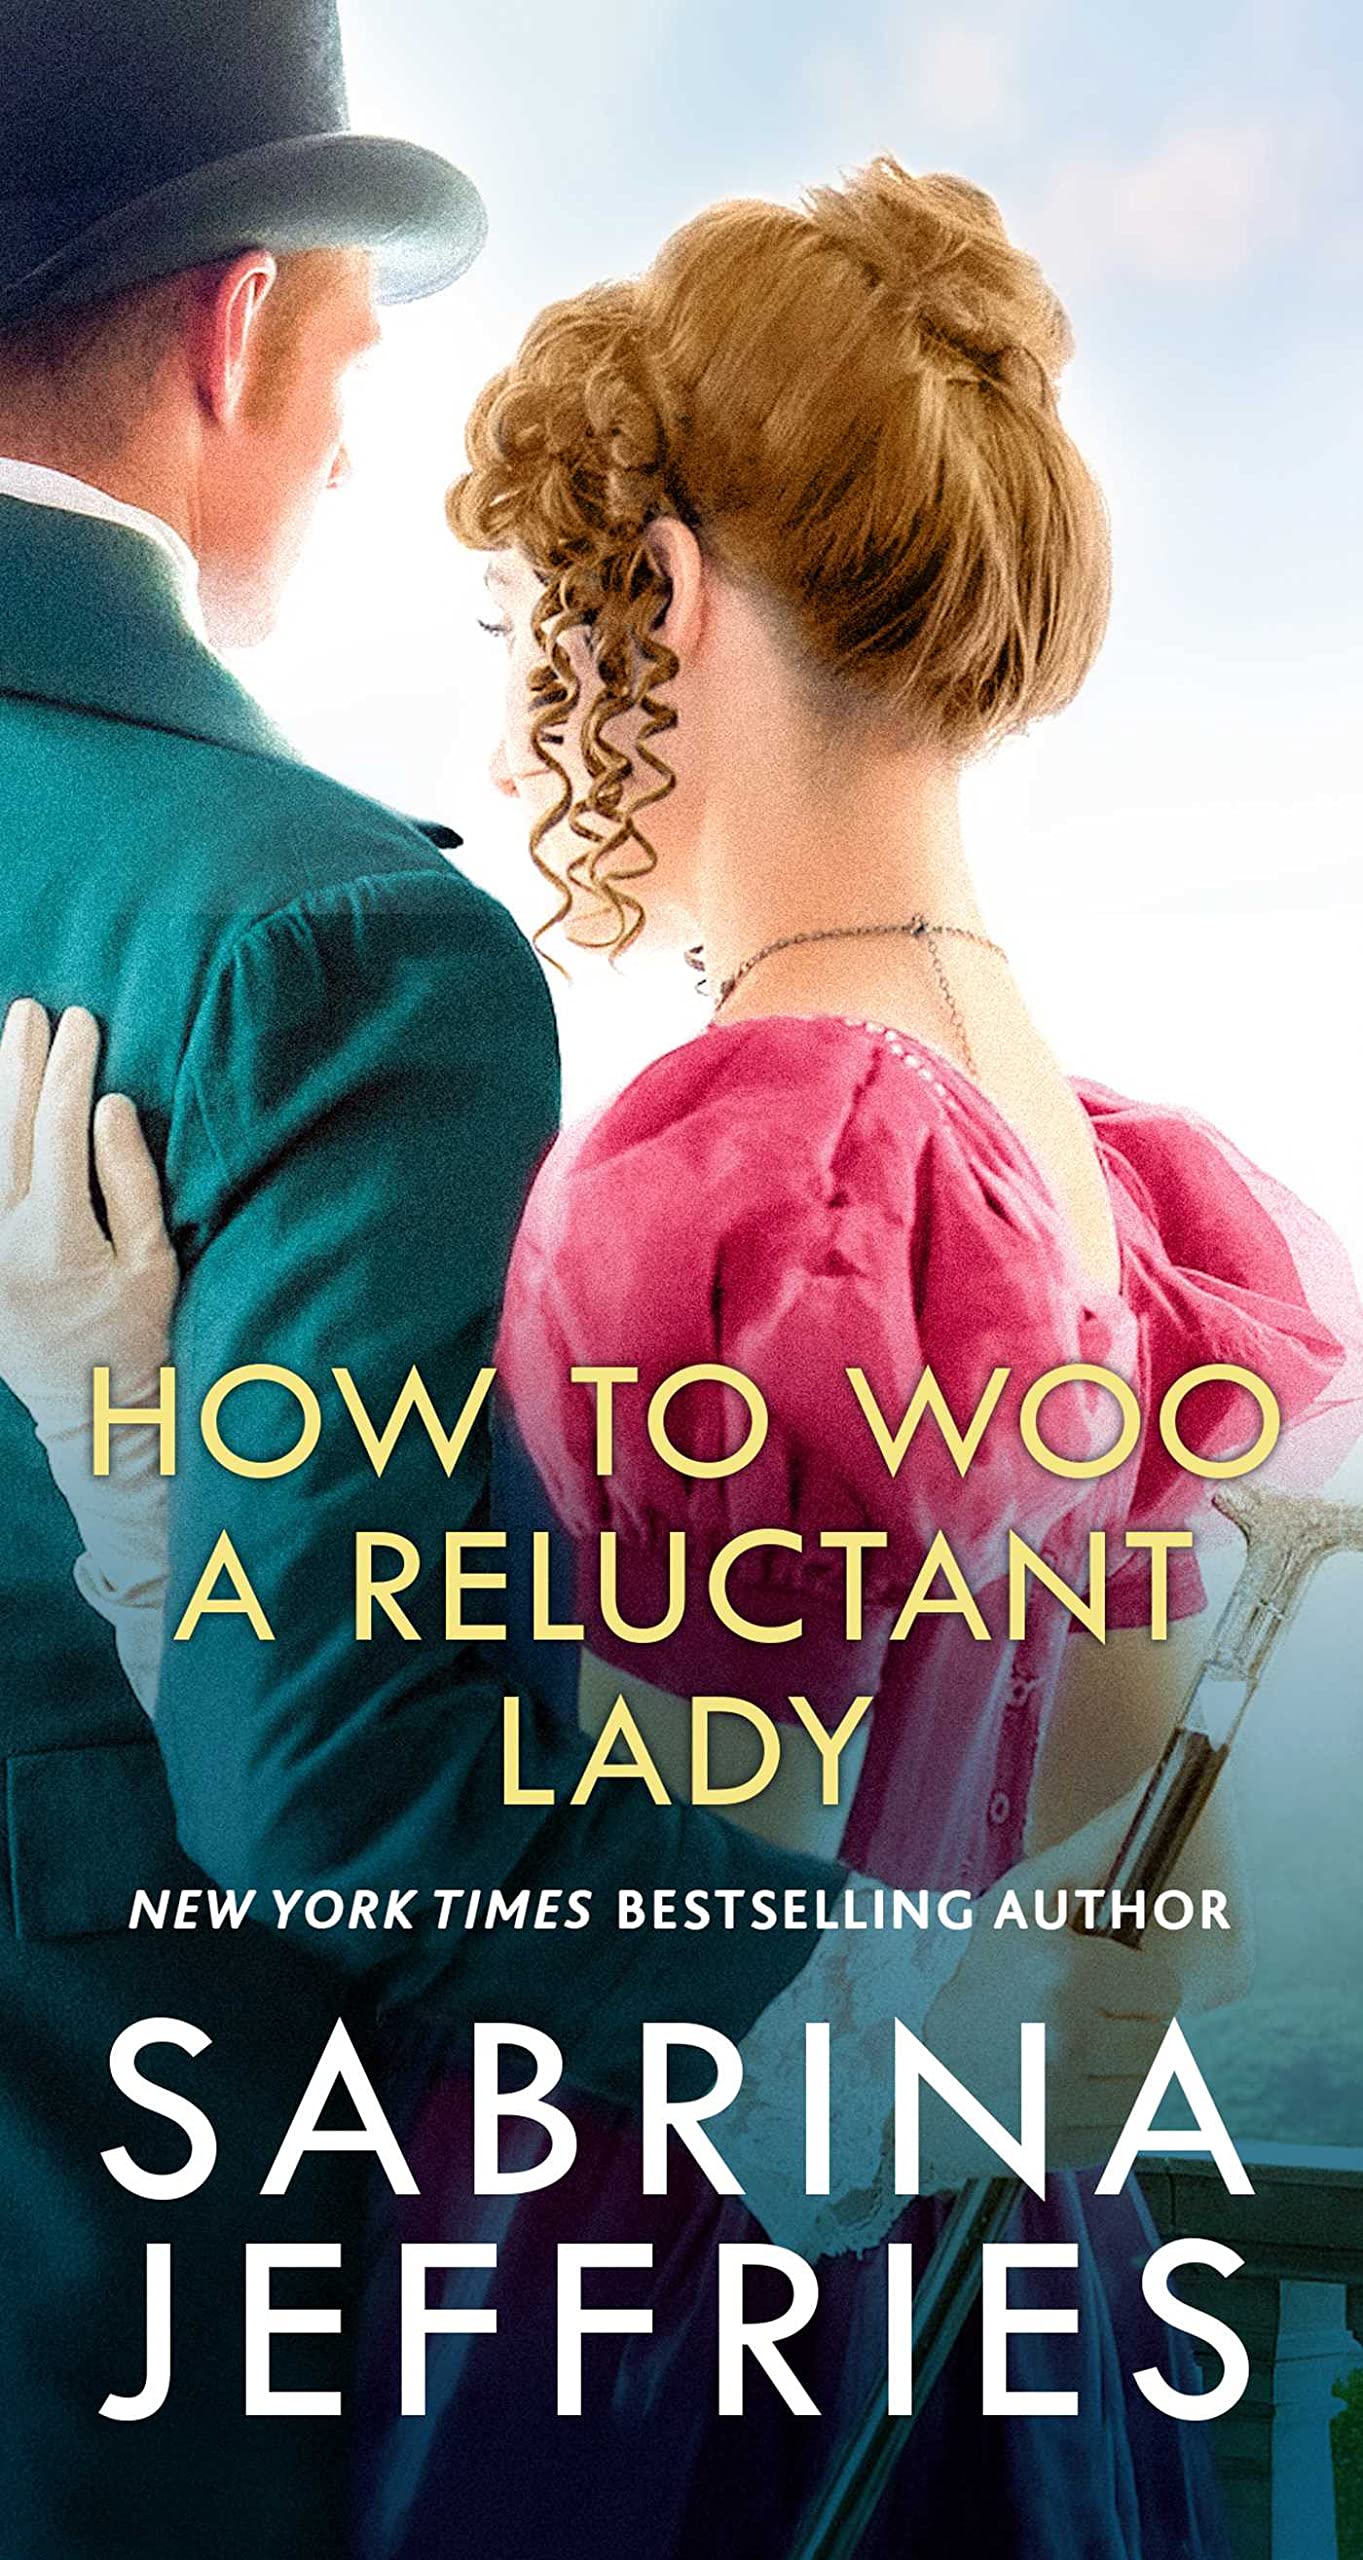 How to Woo a Reluctant Lady New York Times Bestselling Author and Queen of the Sexy Regency Romance Sabrina Jeffries